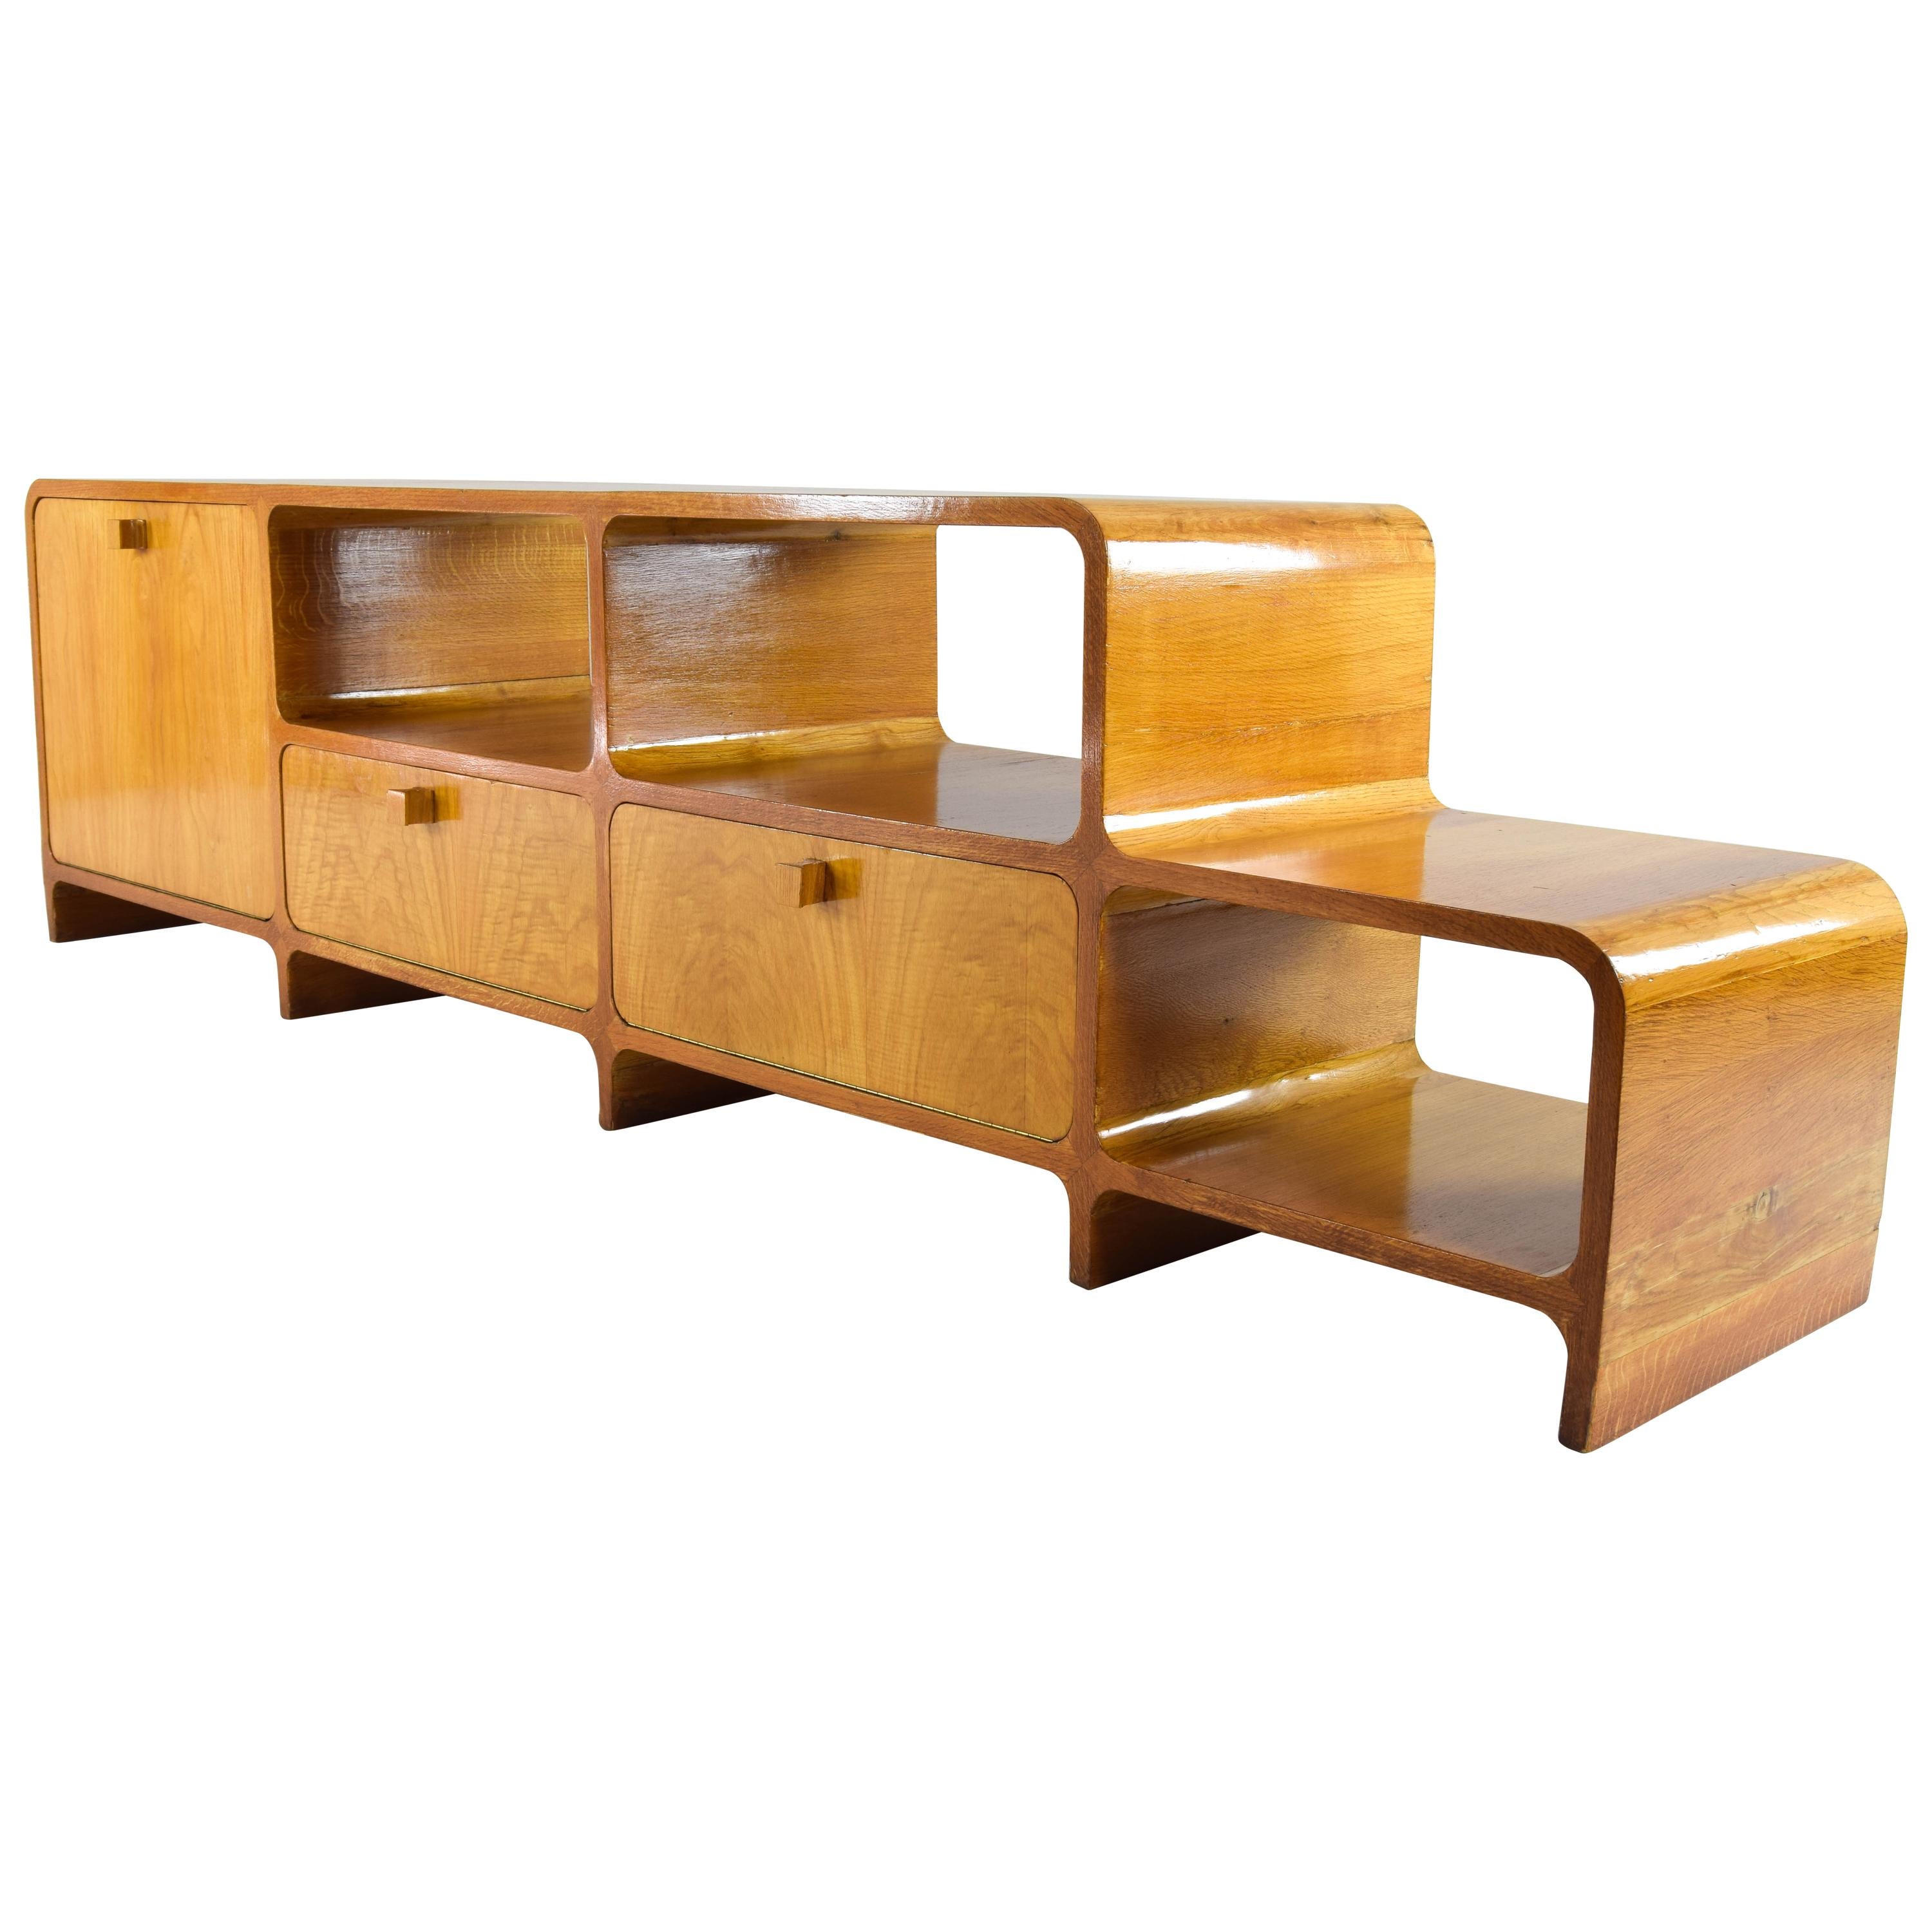 Large Curved Midcentury Danish Modern Teak Double Sided Space Divider Sideboard